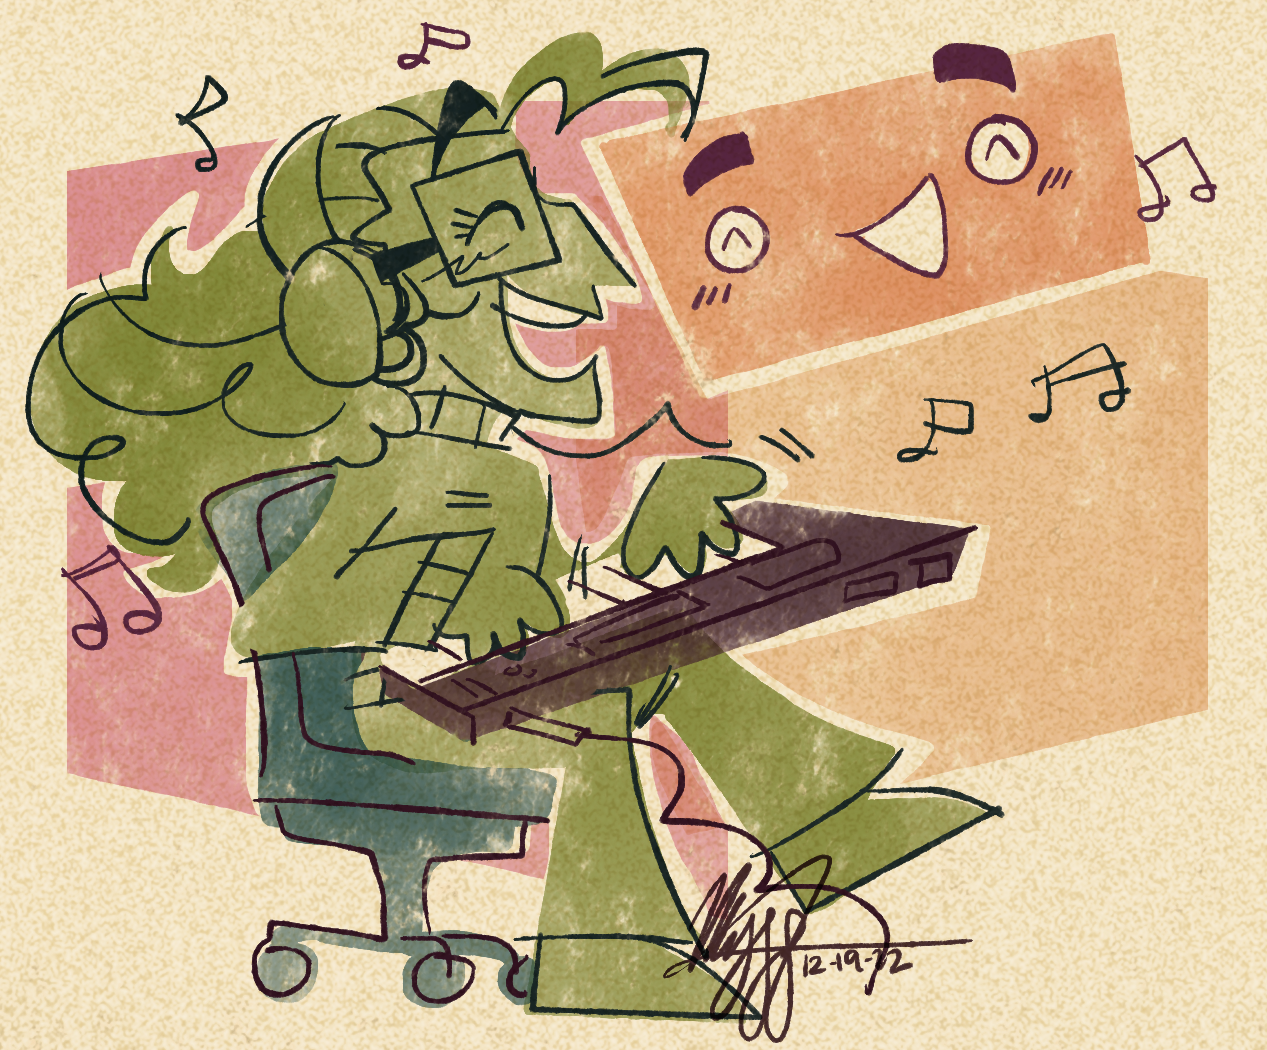 daisy and mark in a retro style artwork with simplistic colors. daisy is sitting down and playing the piano while singing with mark.